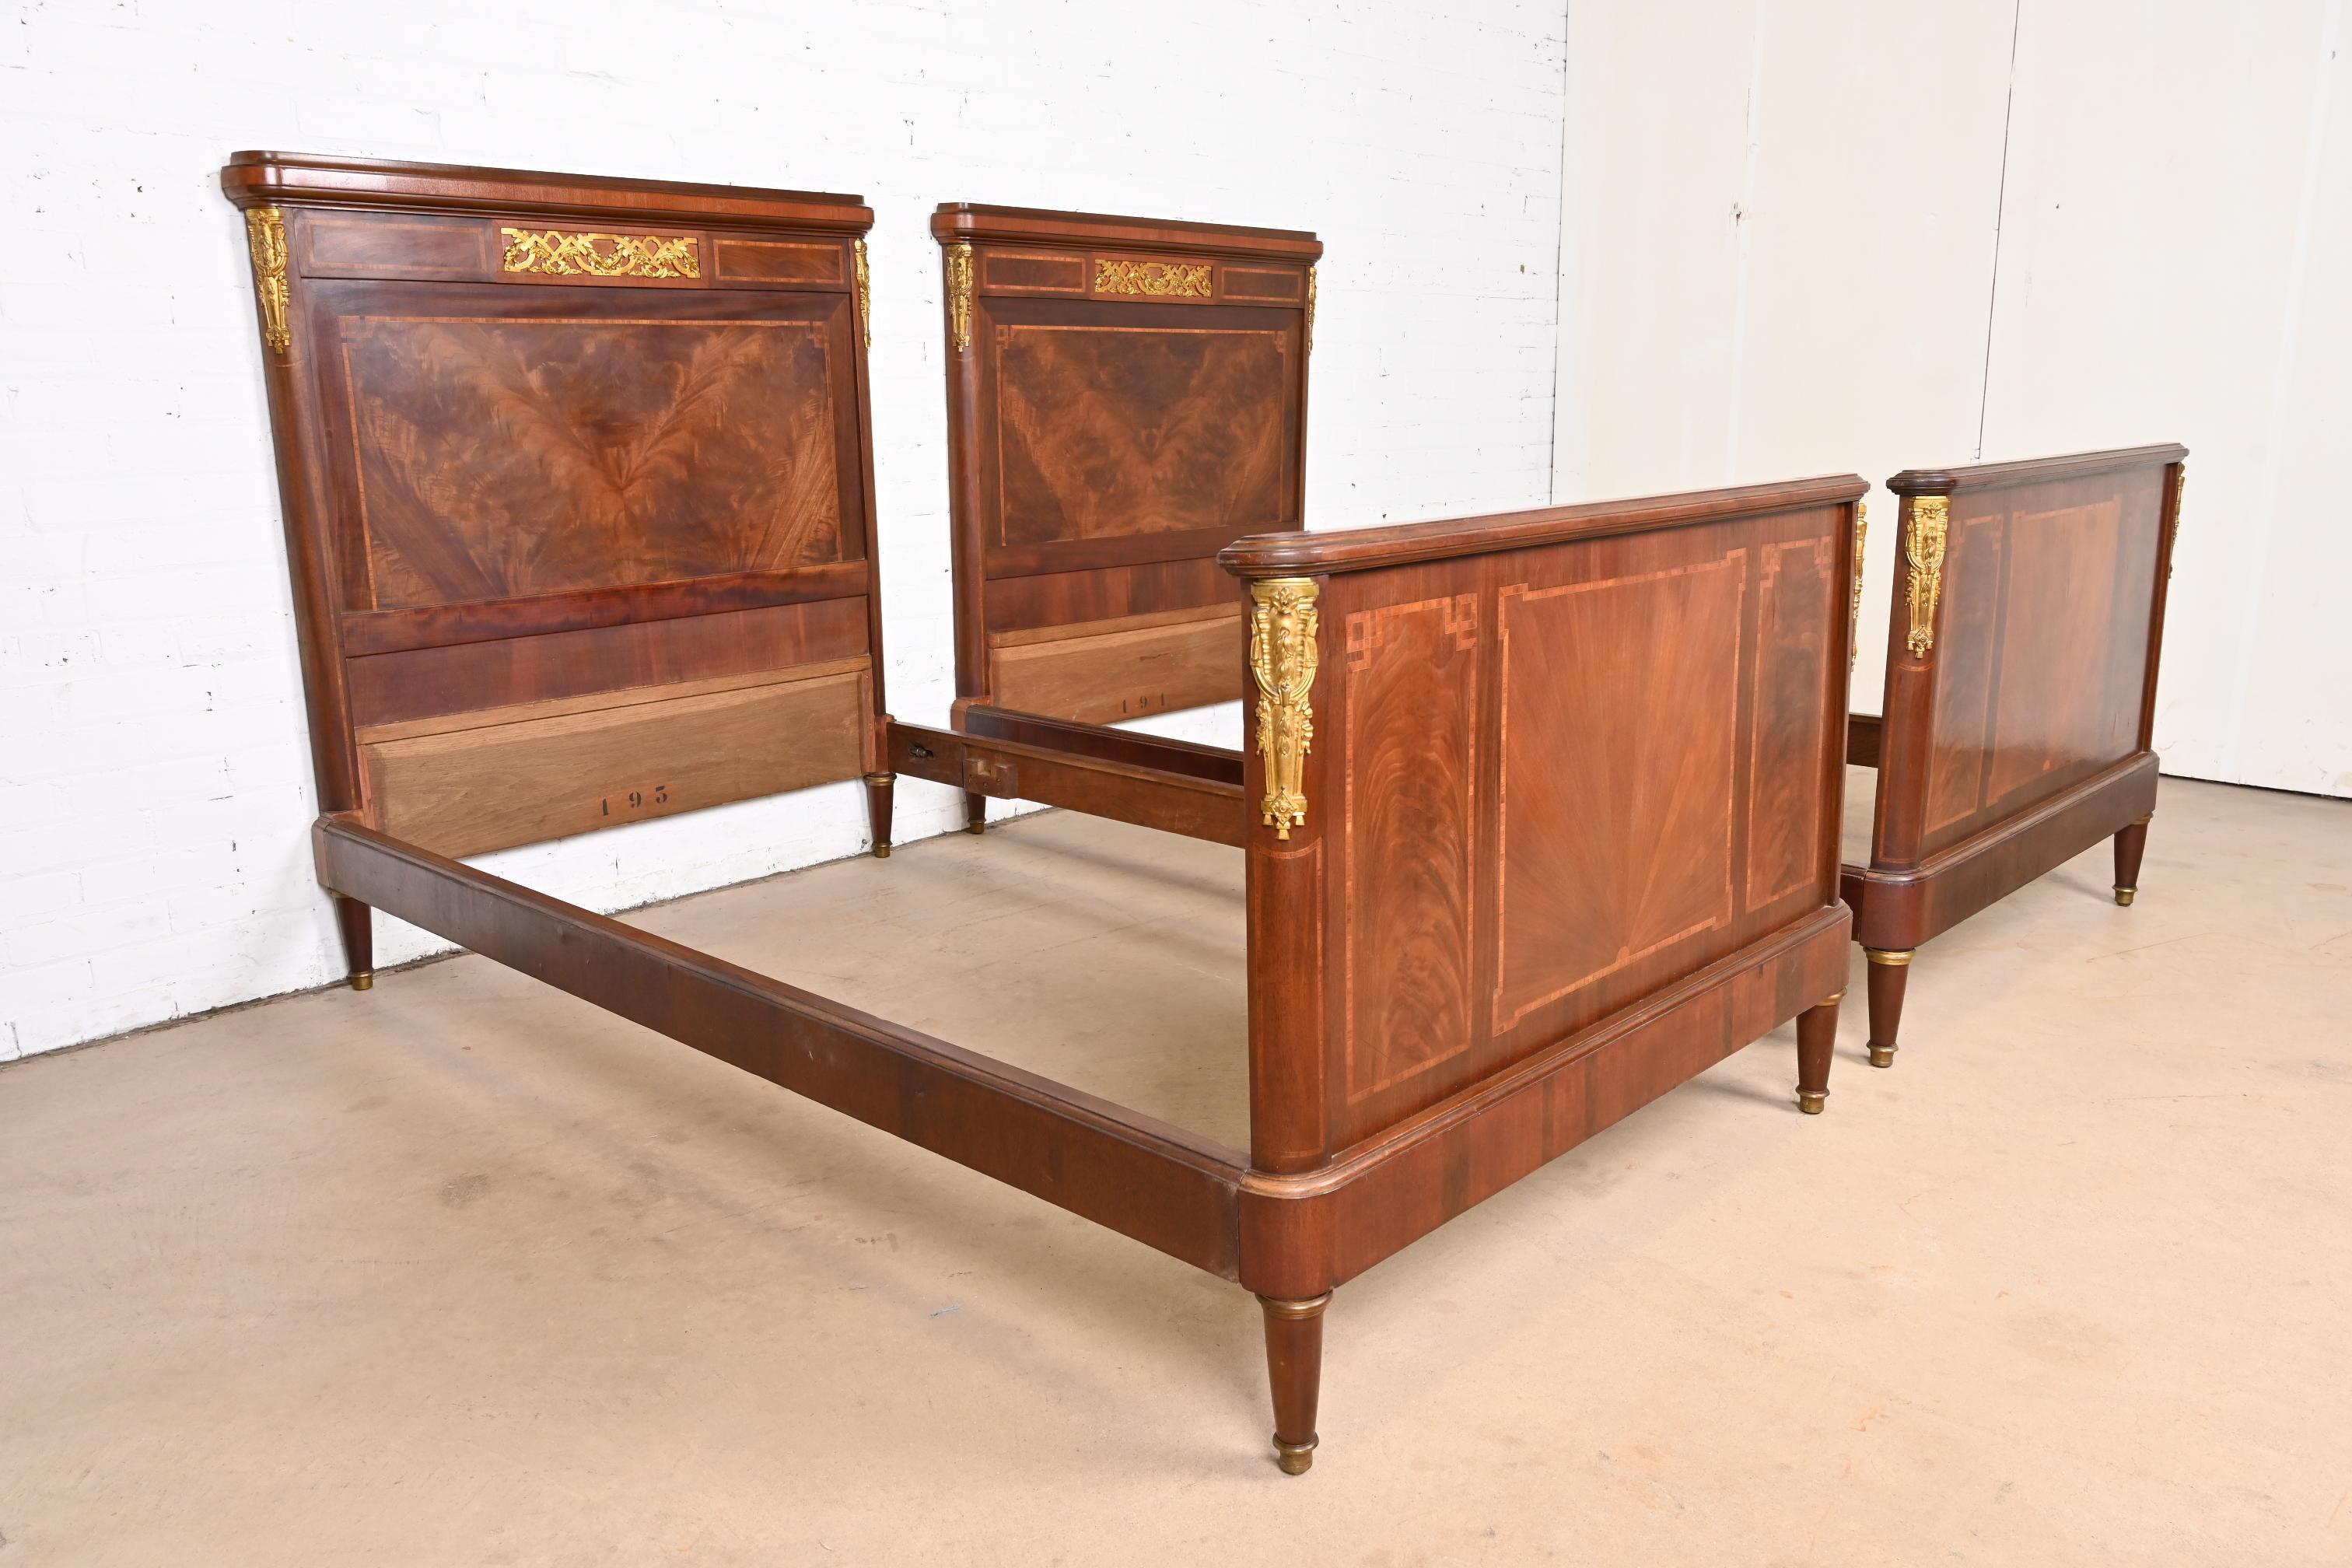 Antique French Regency Louis XVI Inlaid Flame Mahogany Bronze Mounted Twin Beds For Sale 2